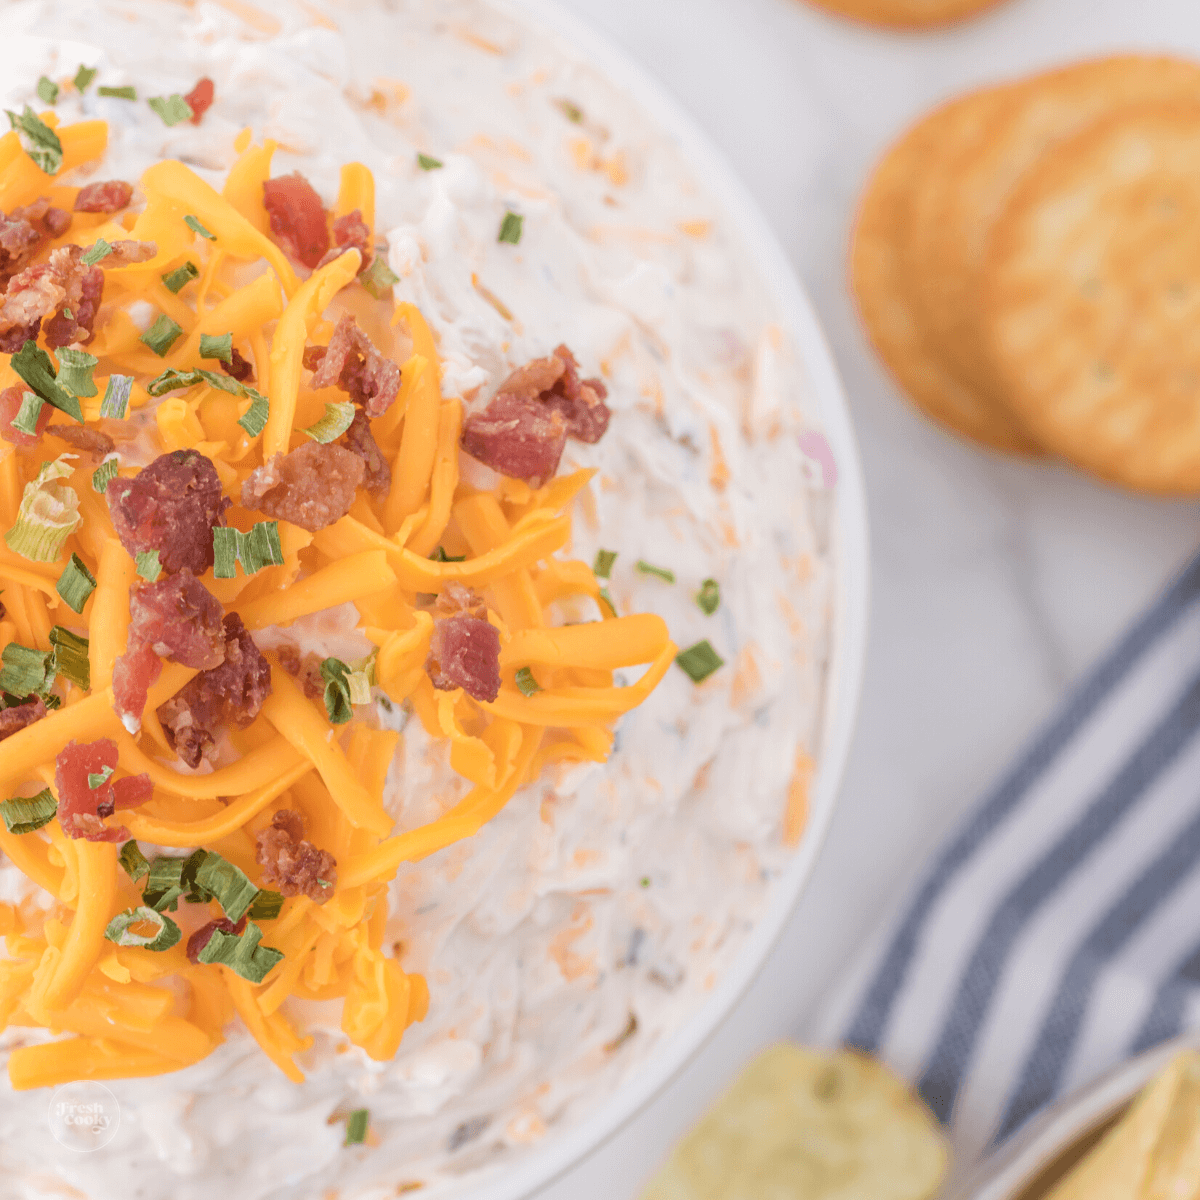 Cowboy crack dip in small bowl topped with cheddar cheese and bacon bits.